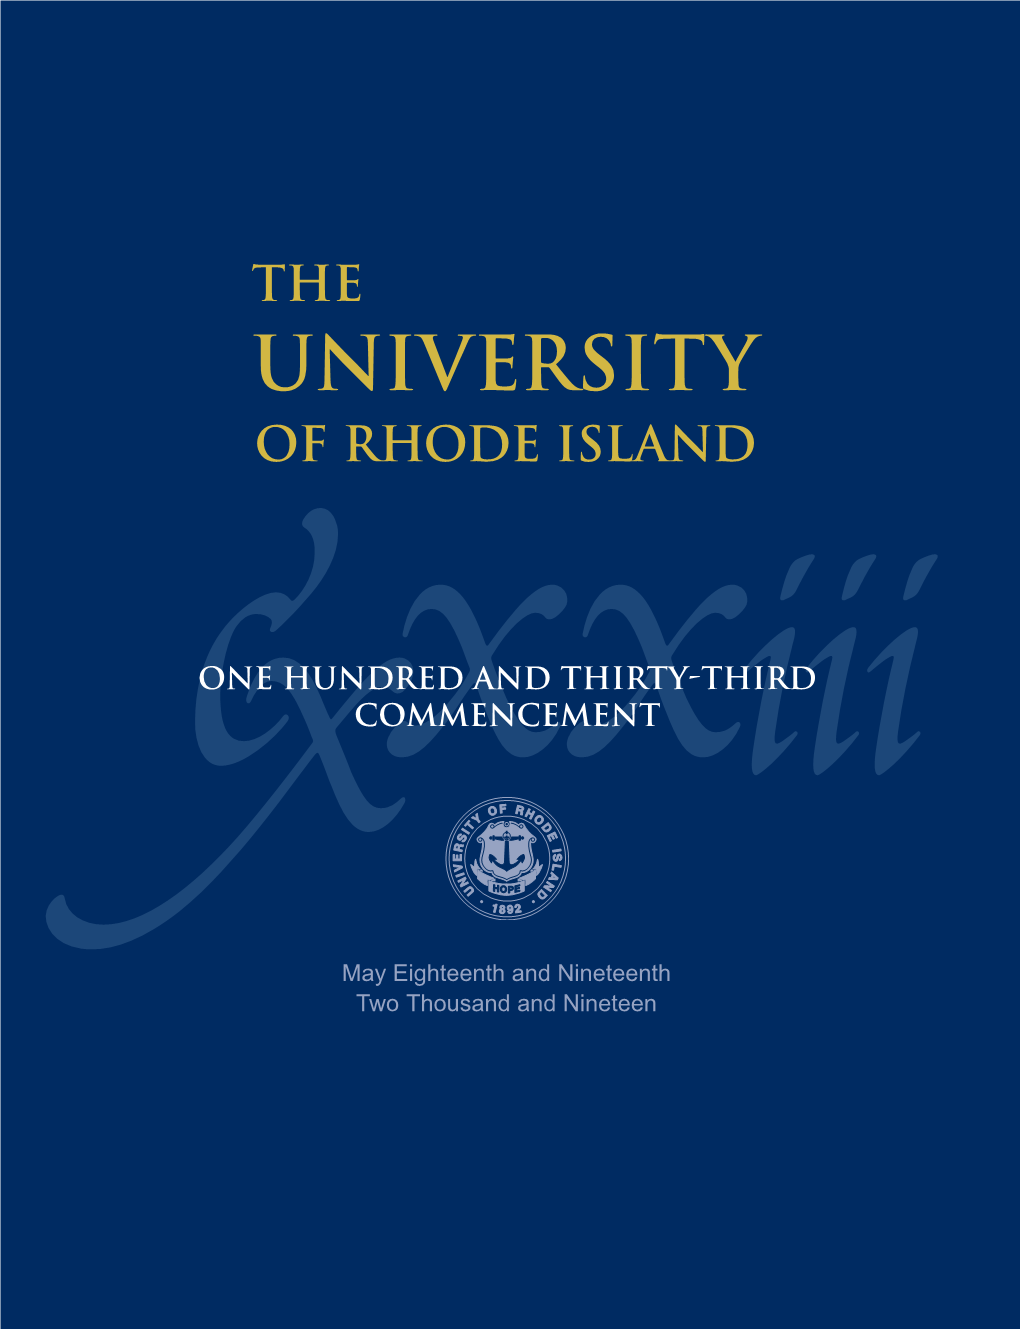 ONE HUNDRED and THIRTY-THIRD COMMENCEMENT Iii